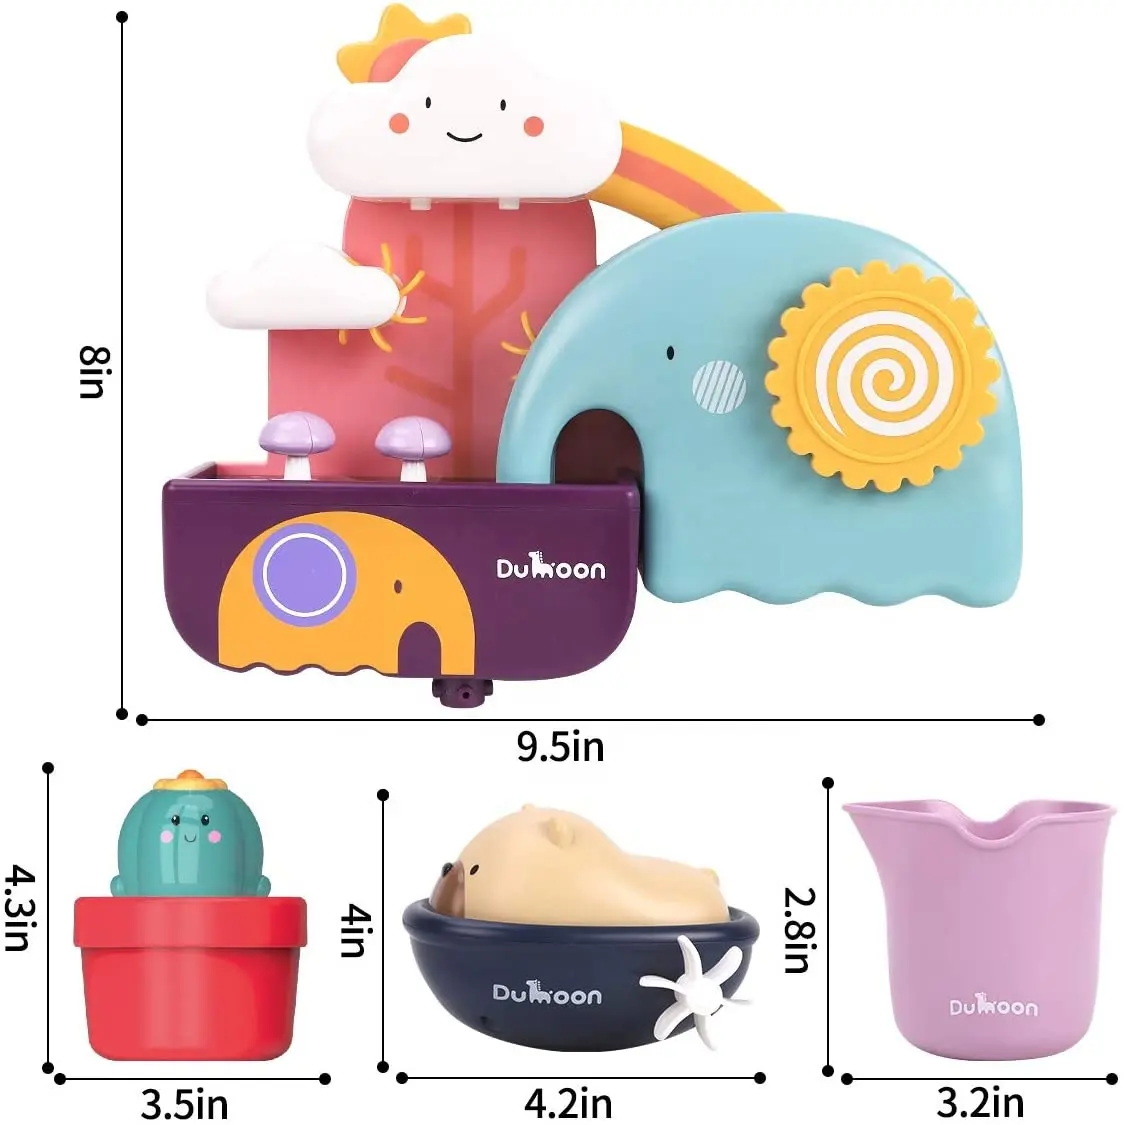 Hot Selling Baby Elephant Bath toy Bathtub Toy Elephant Waterfall for Toddlers